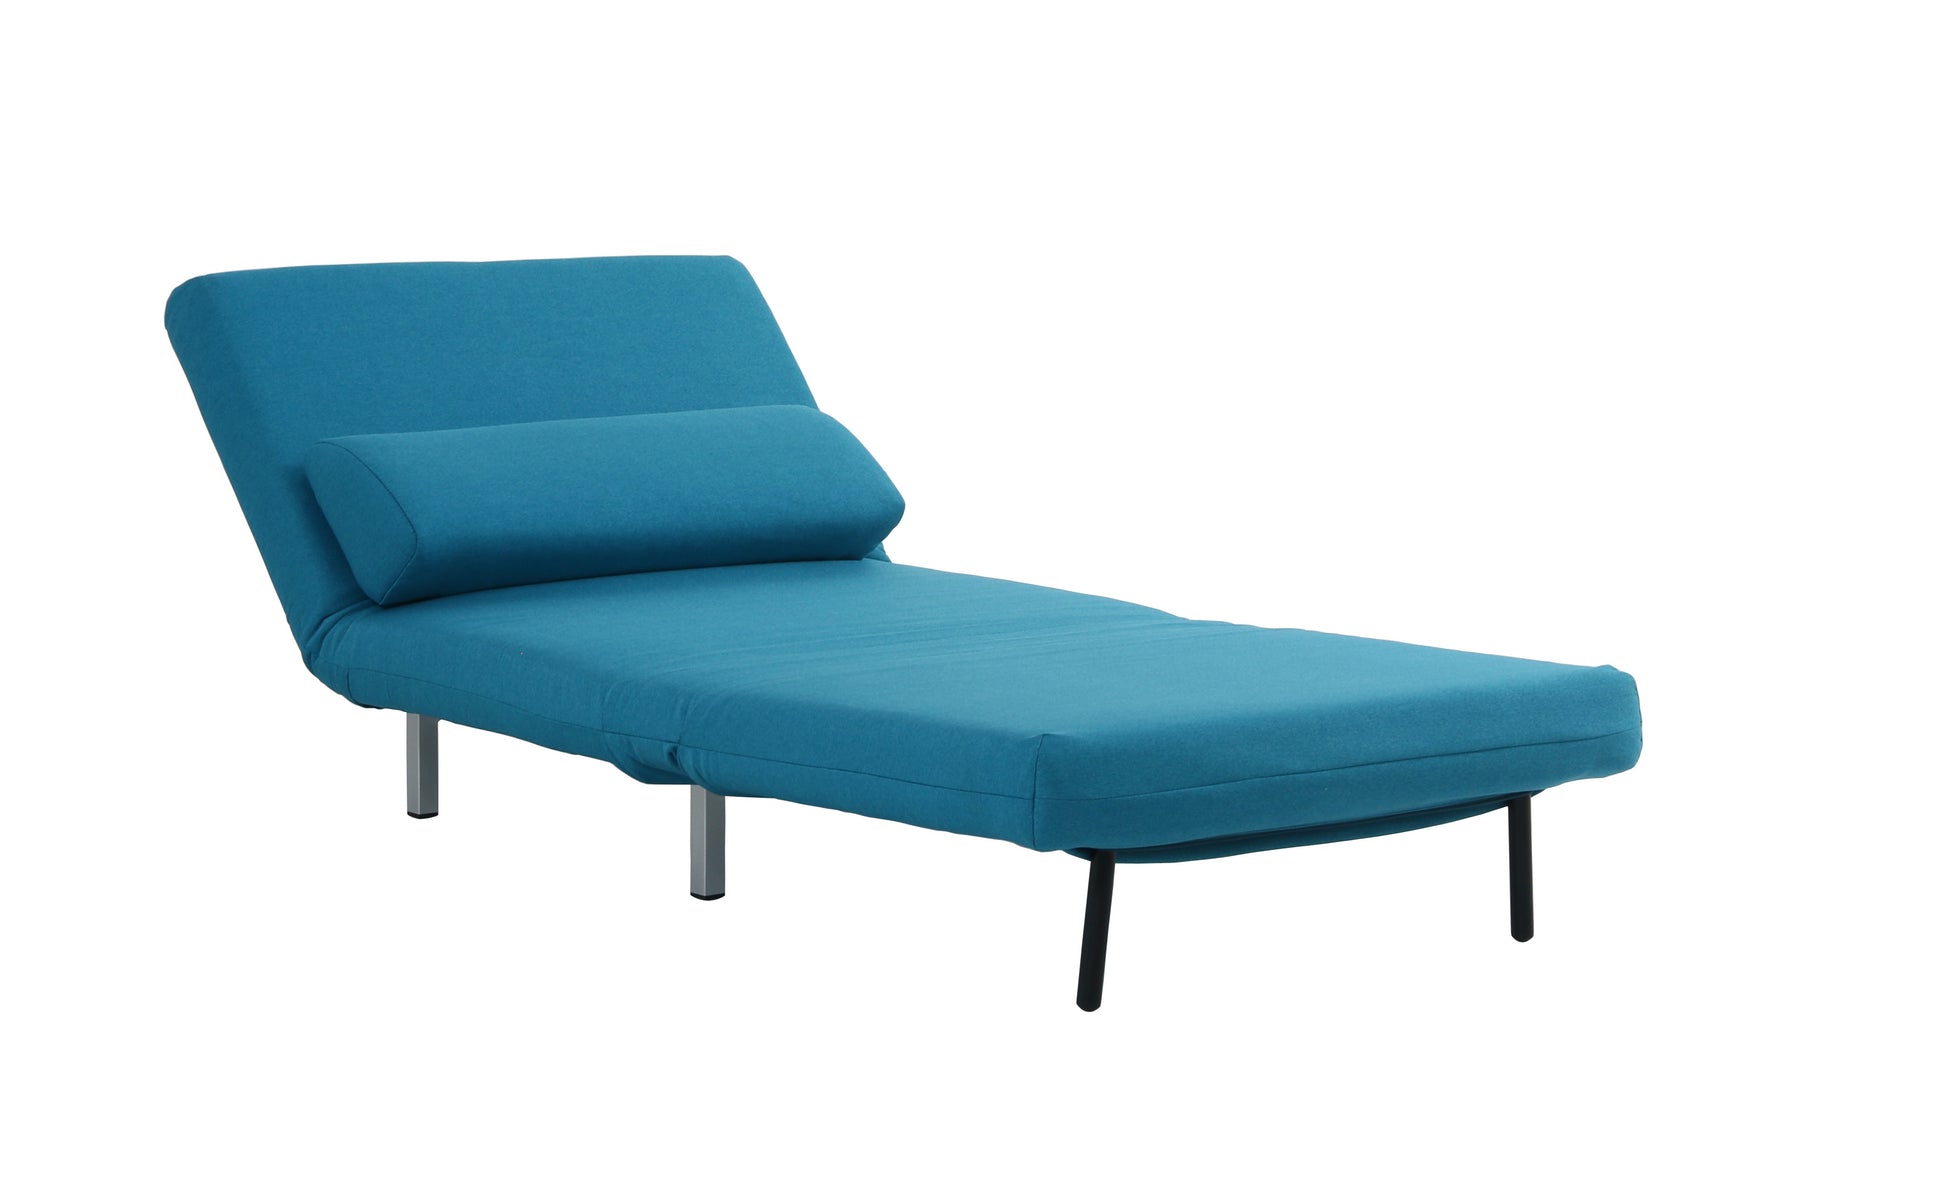 Premium Chair Bed Lk06-1 Teal Fabric by JM